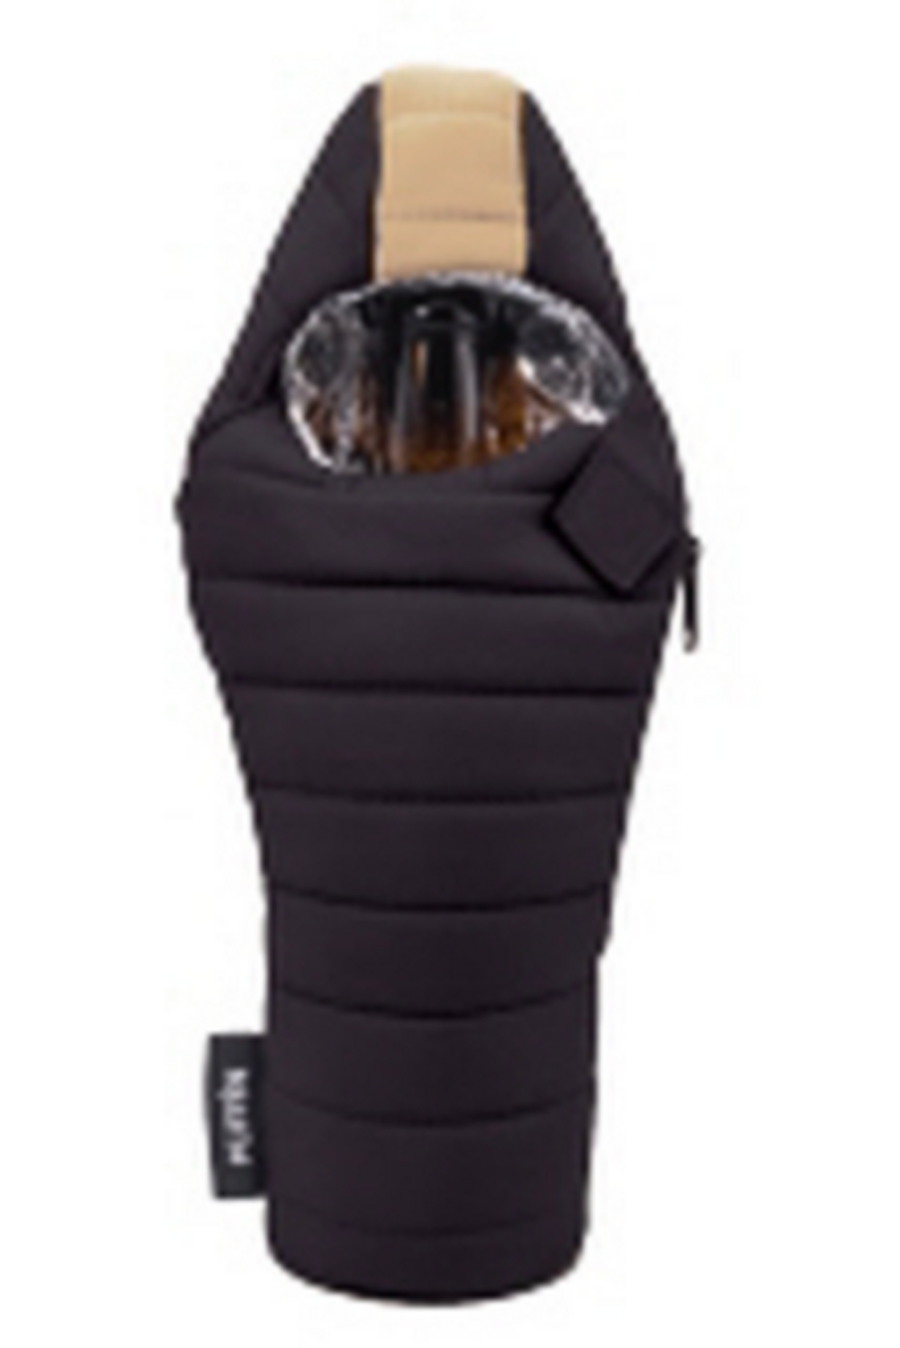 Puffin Wine Bag-Gifts + Candles-Black-[option4]-[option5]-[option6]-Shop-Womens-Boutique-Store